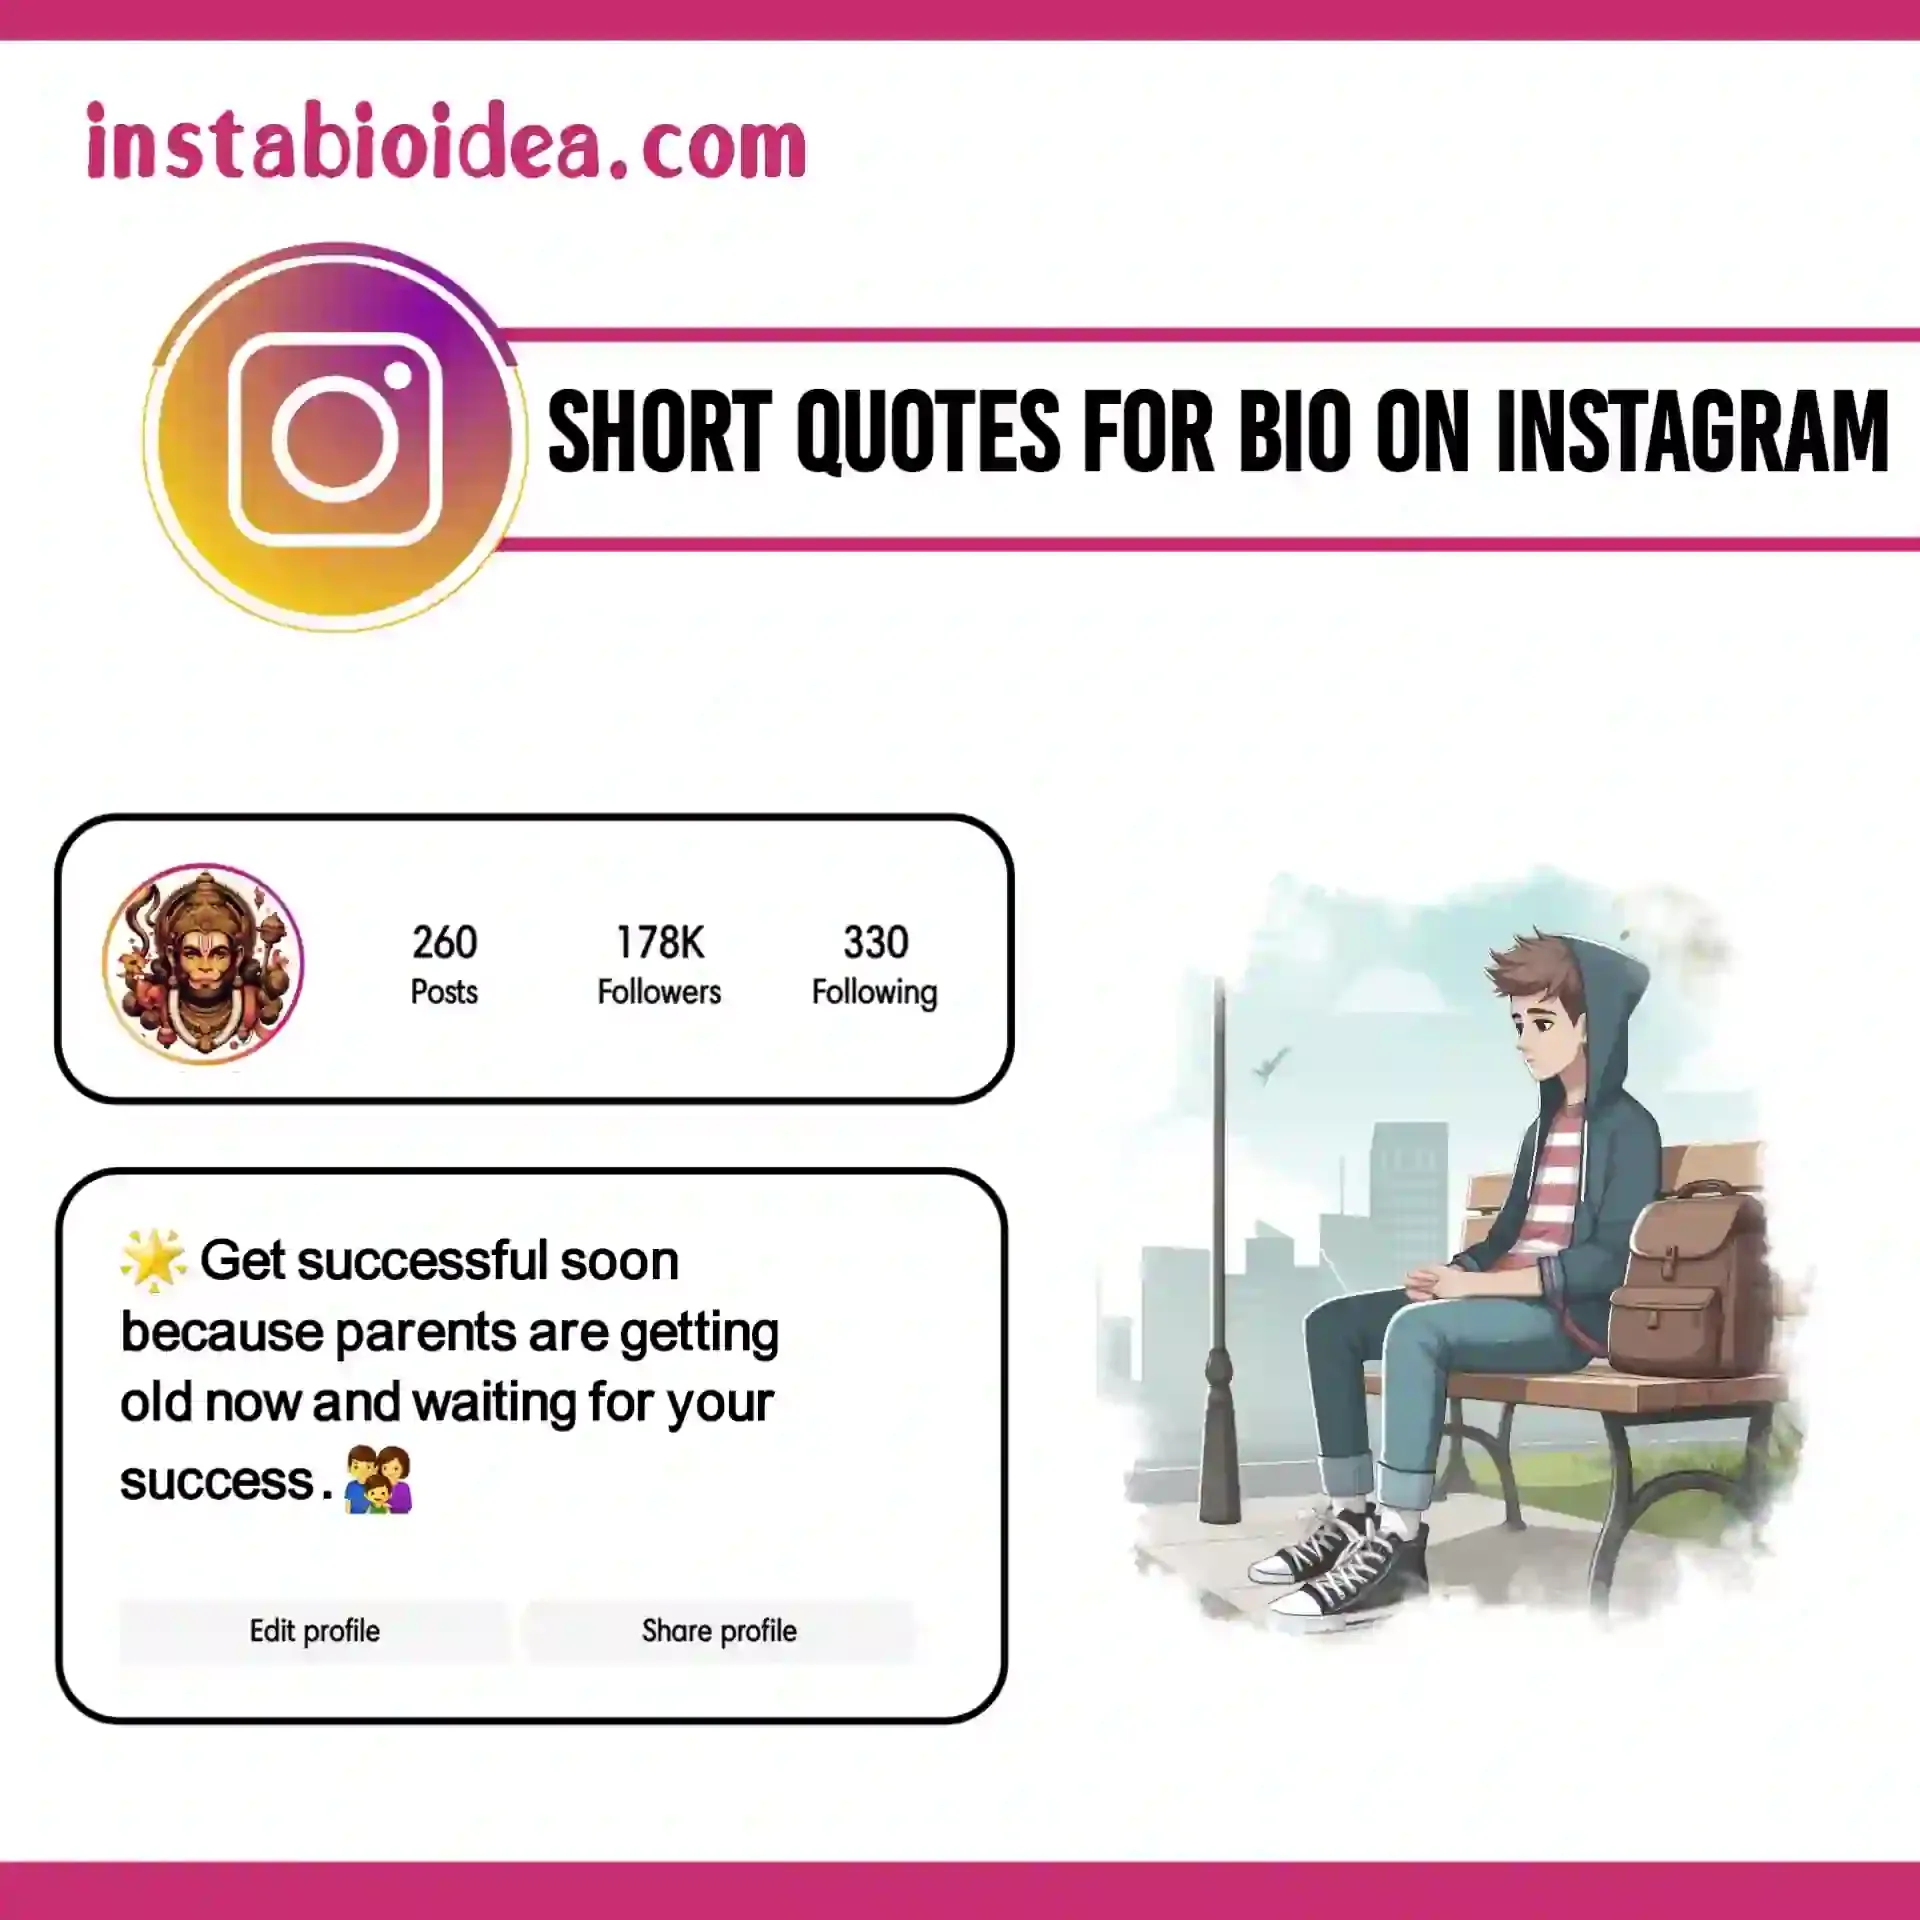 short quotes for bio on instagram image